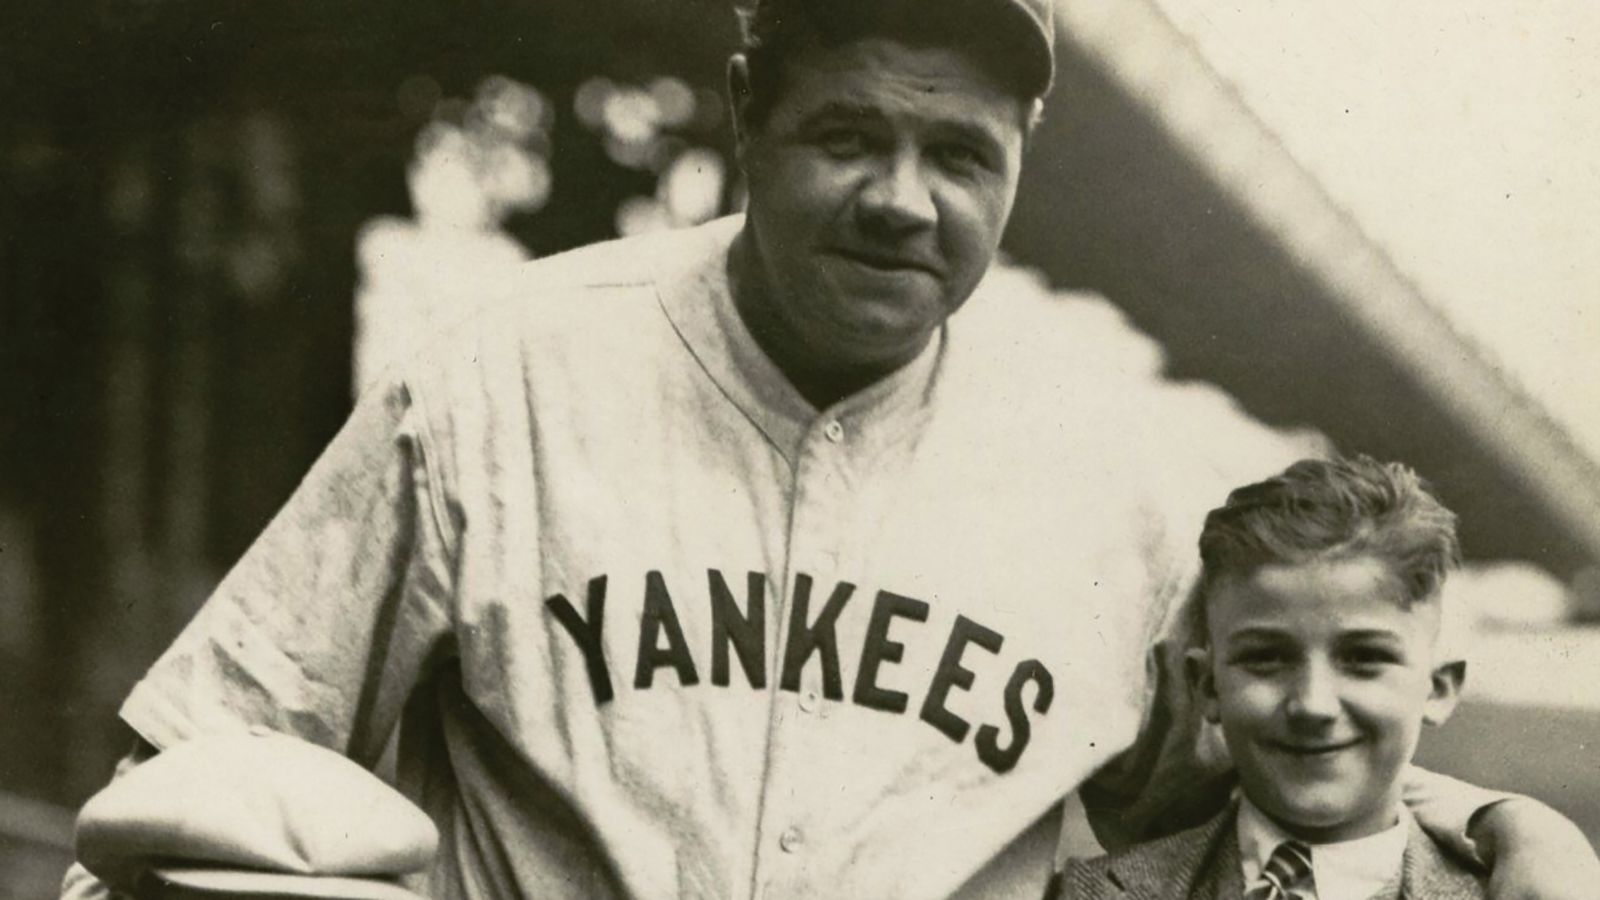 Rare Babe Ruth Road Jersey Breaks Record with Sale Price Over $5.6 Million  - The Radicards® Blog